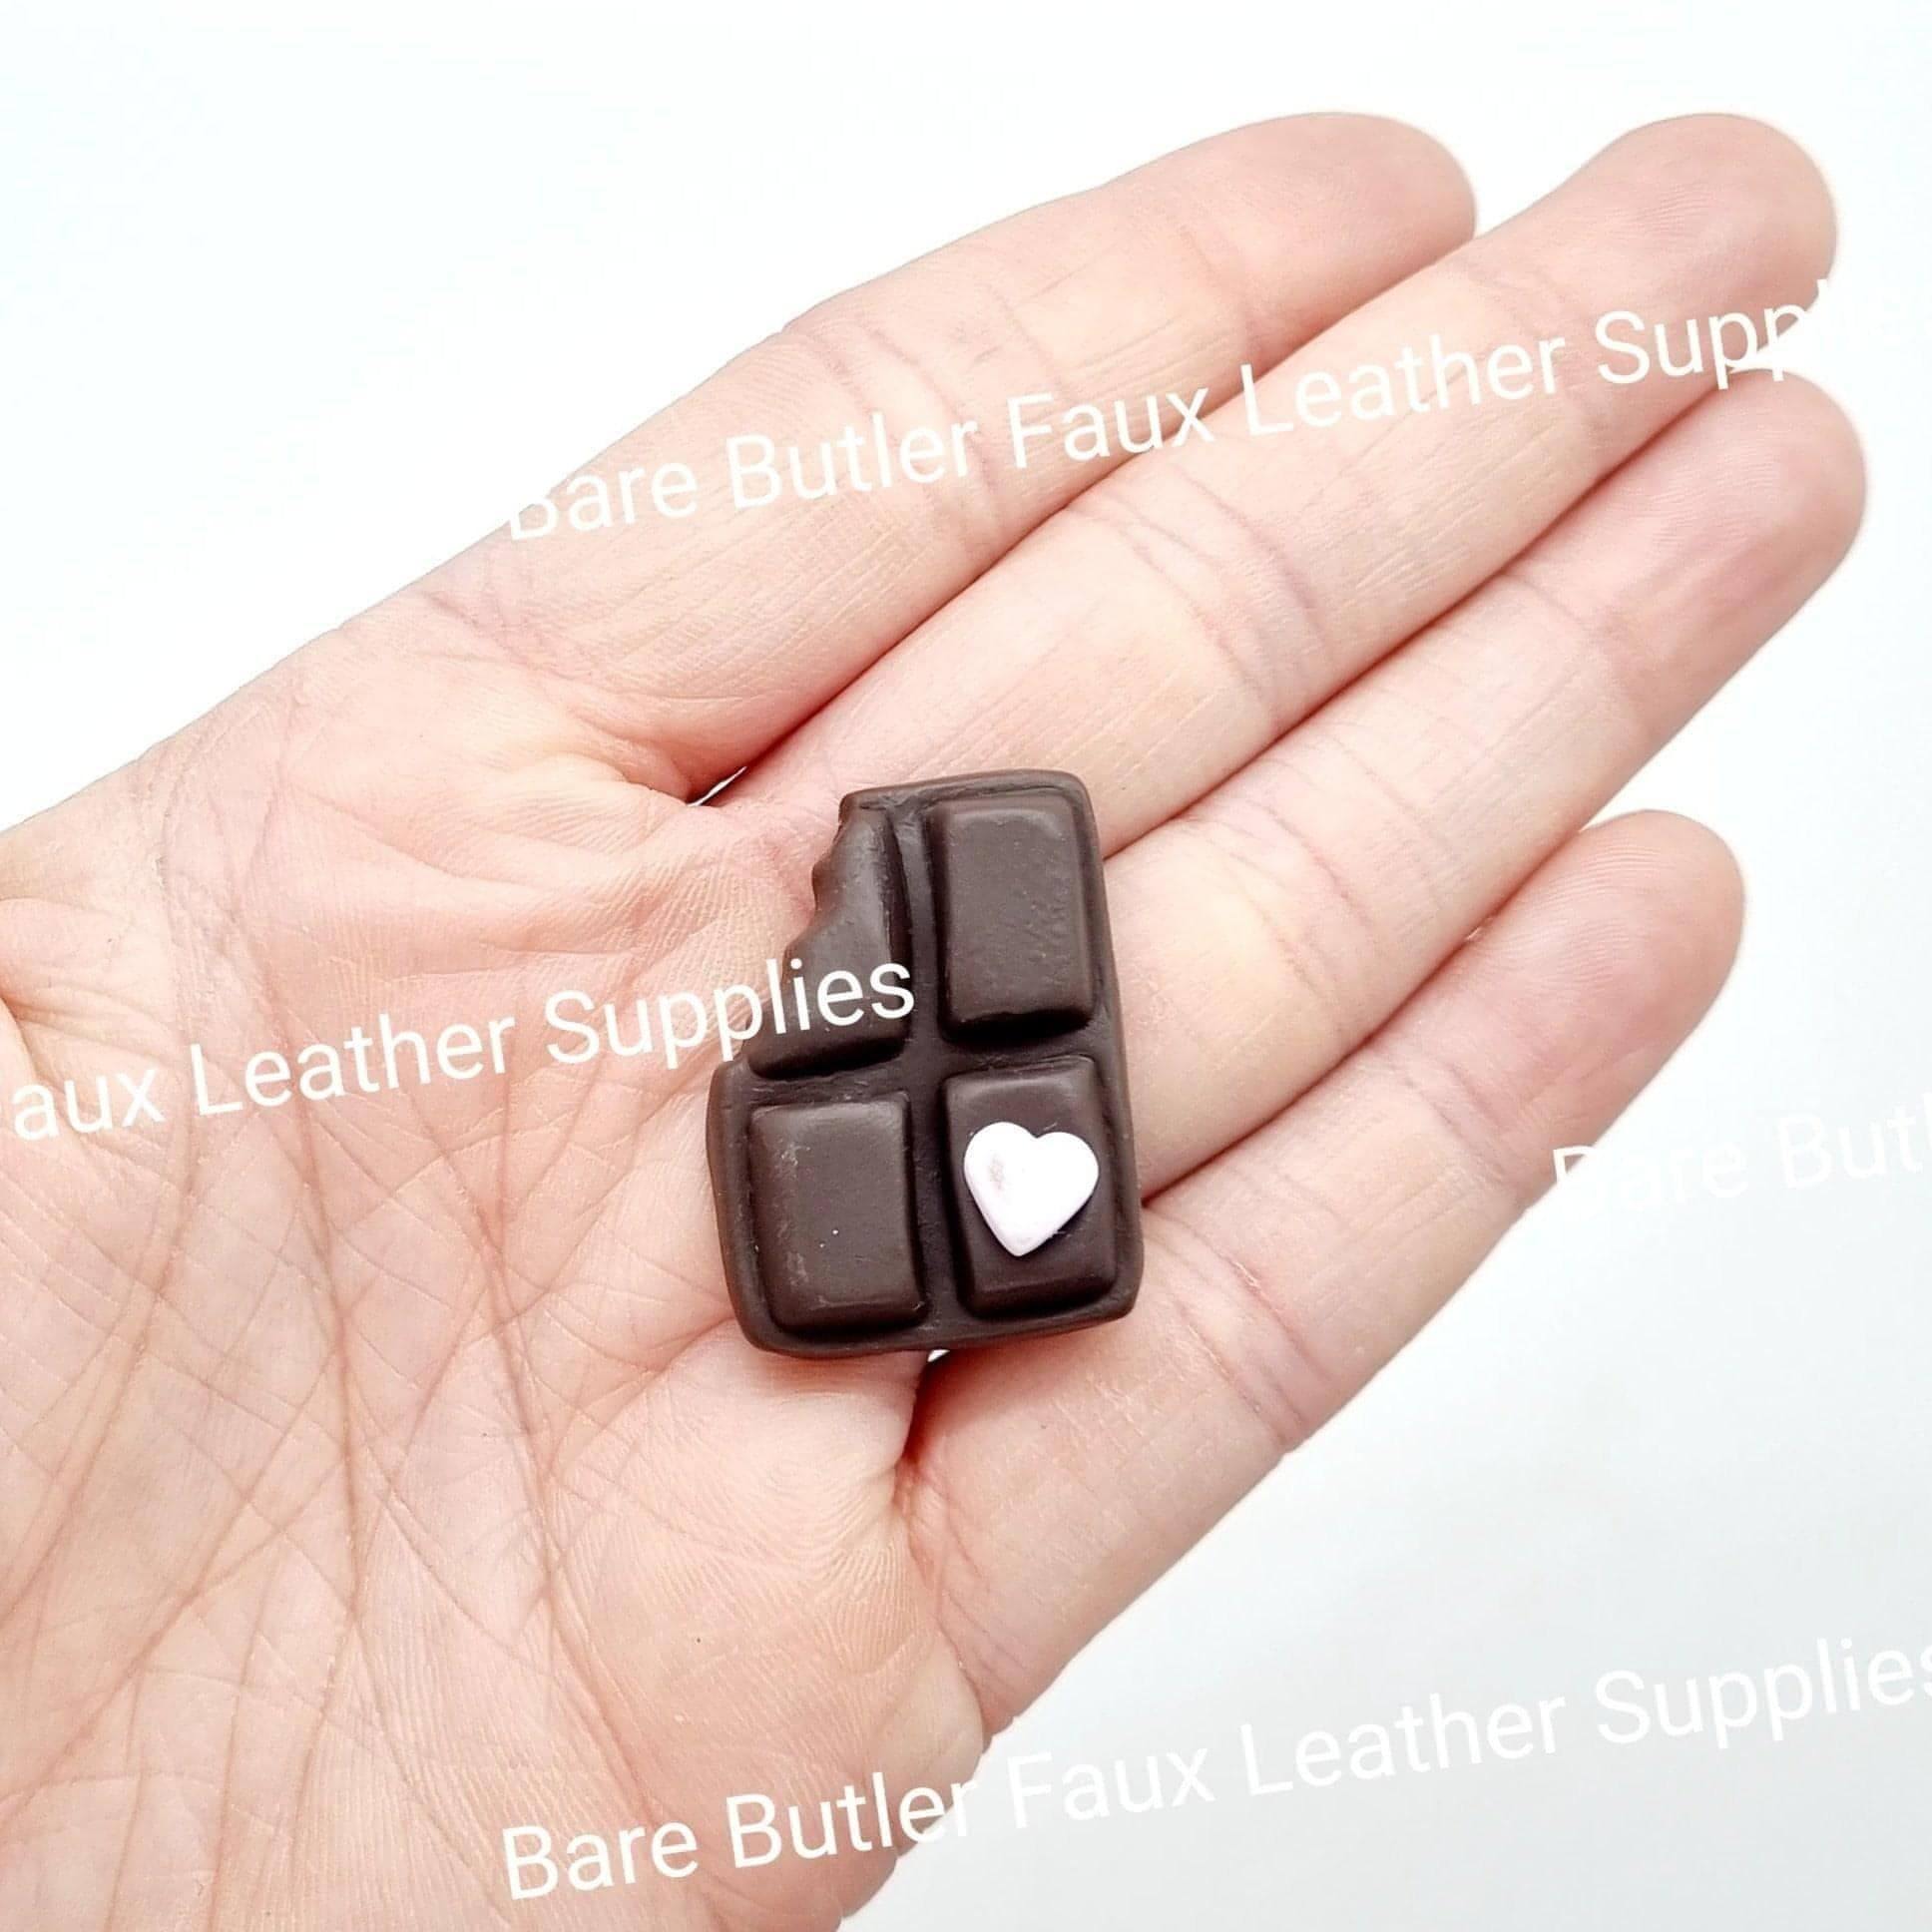 Chocolate Block - Chocolate, Clay, Clays - Bare Butler Faux Leather Supplies 